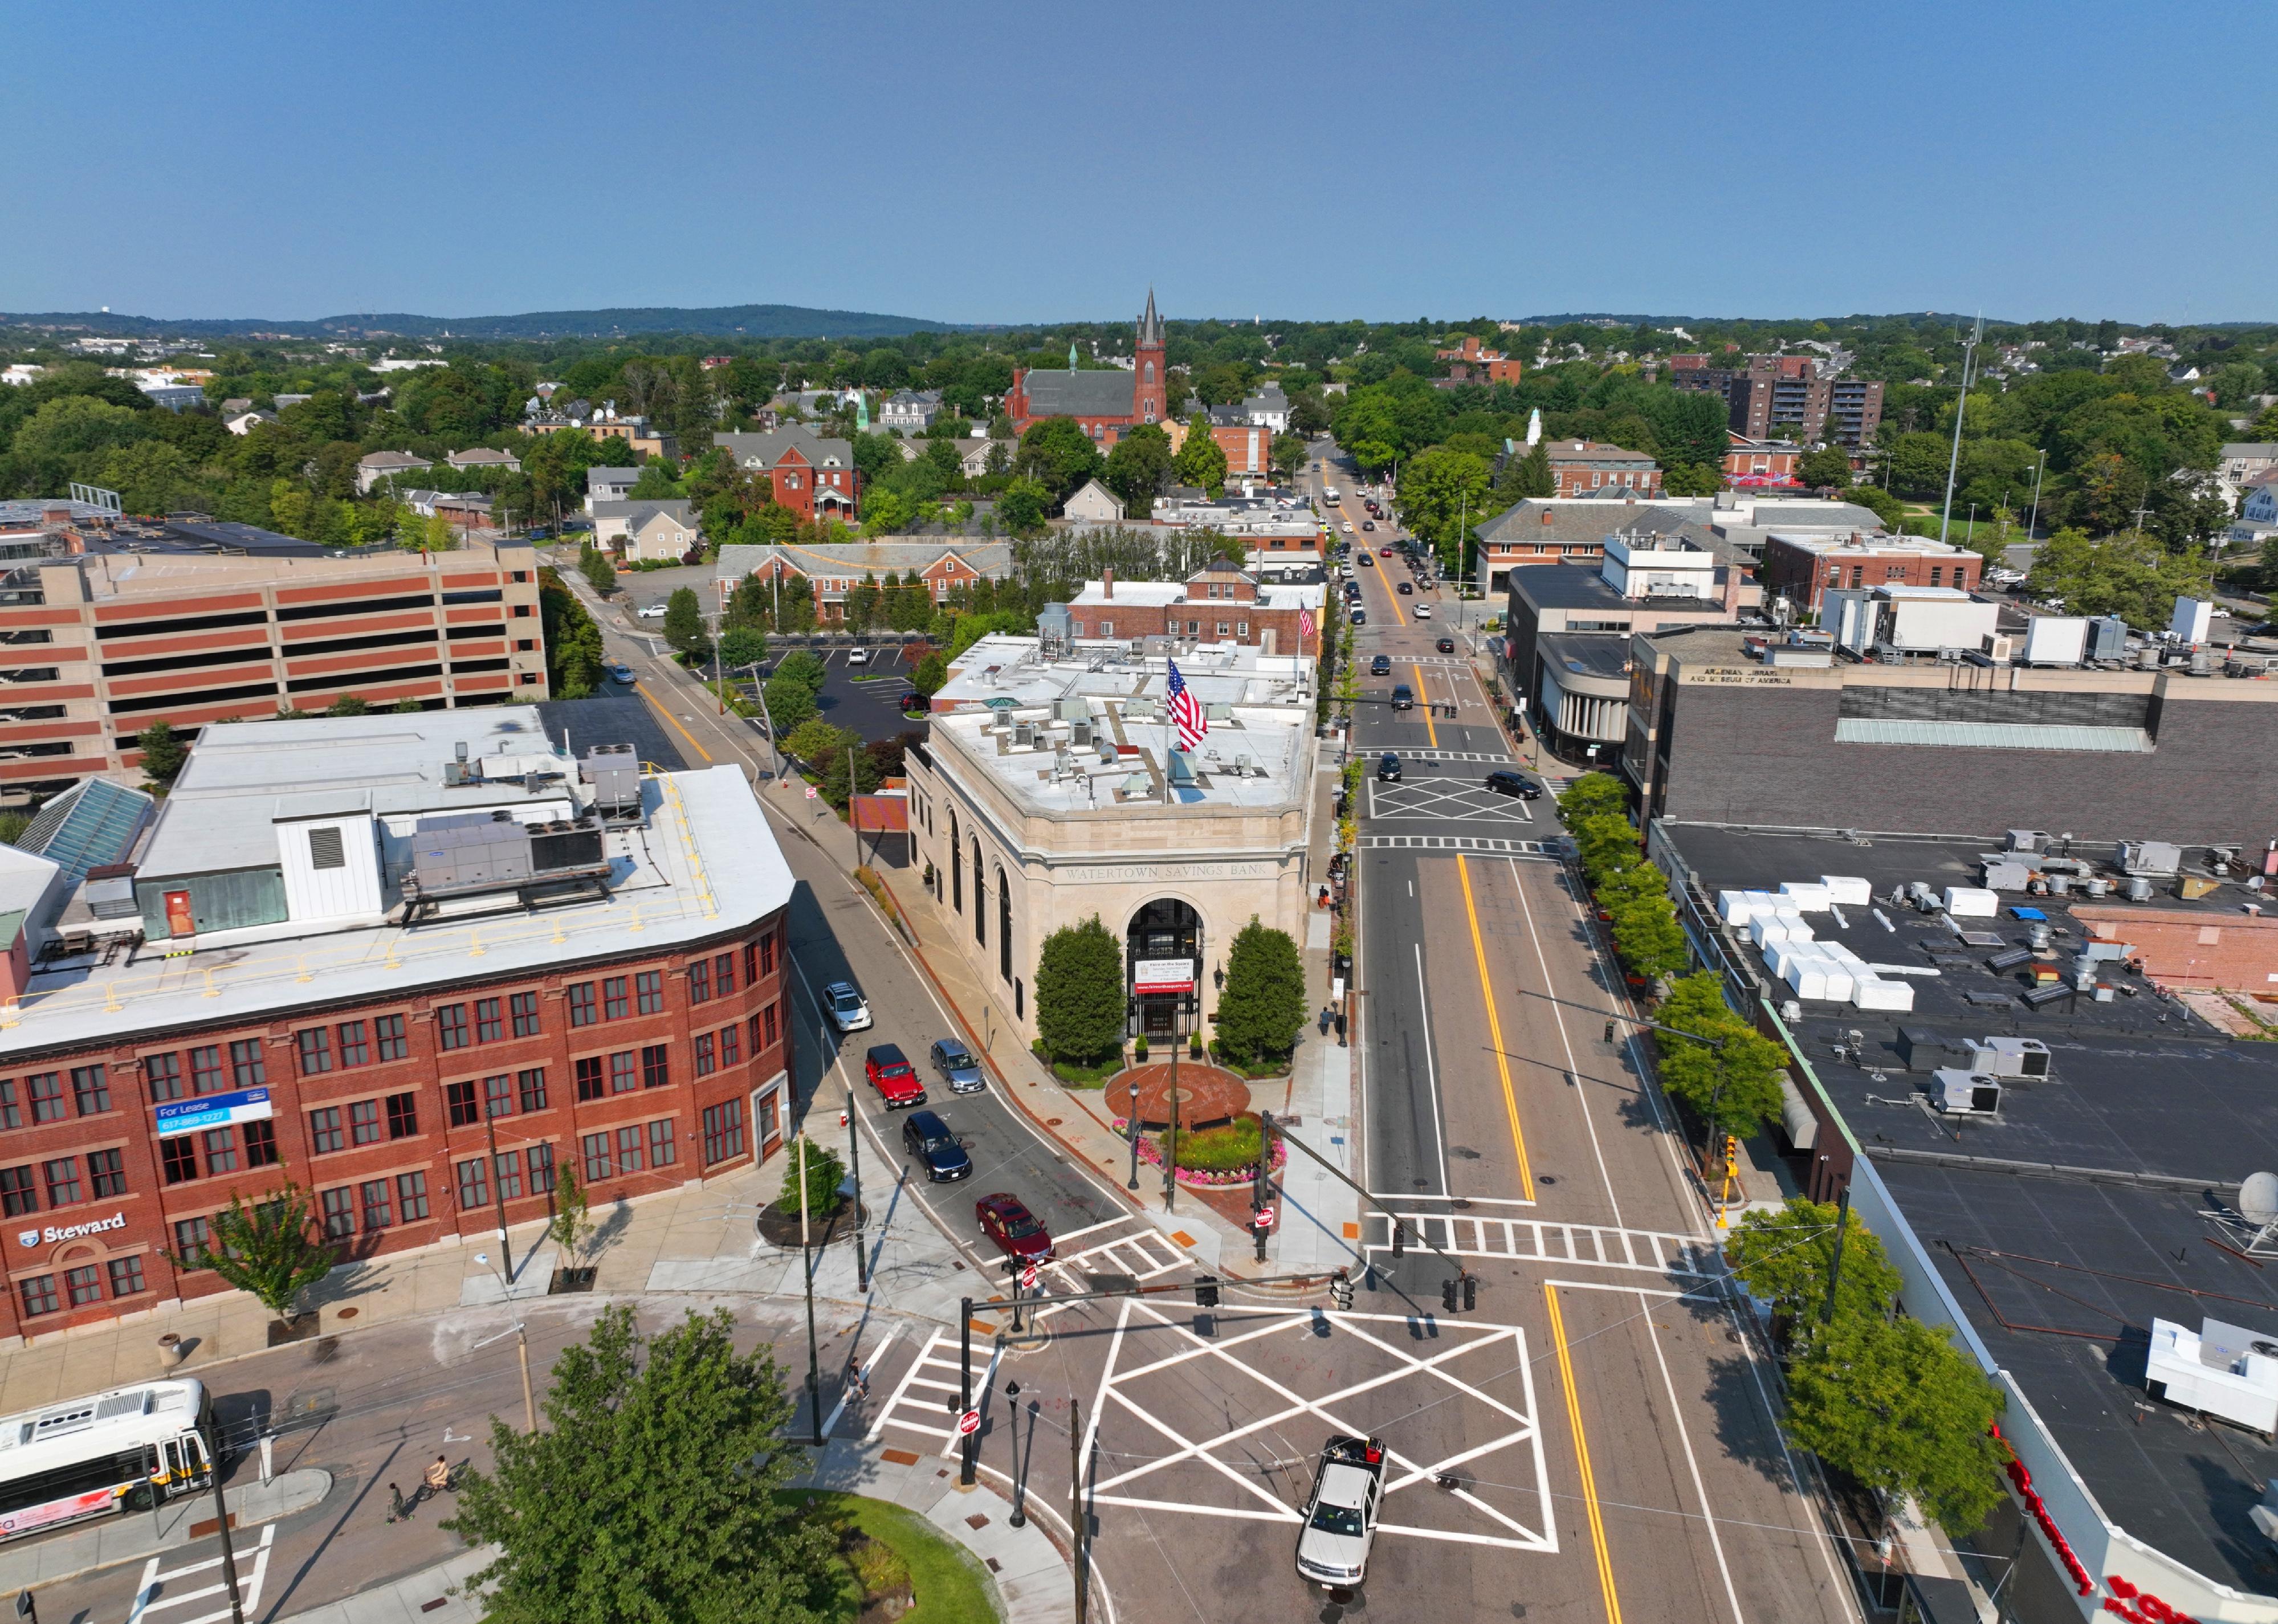 Aerial of the historic city center of Watertown.